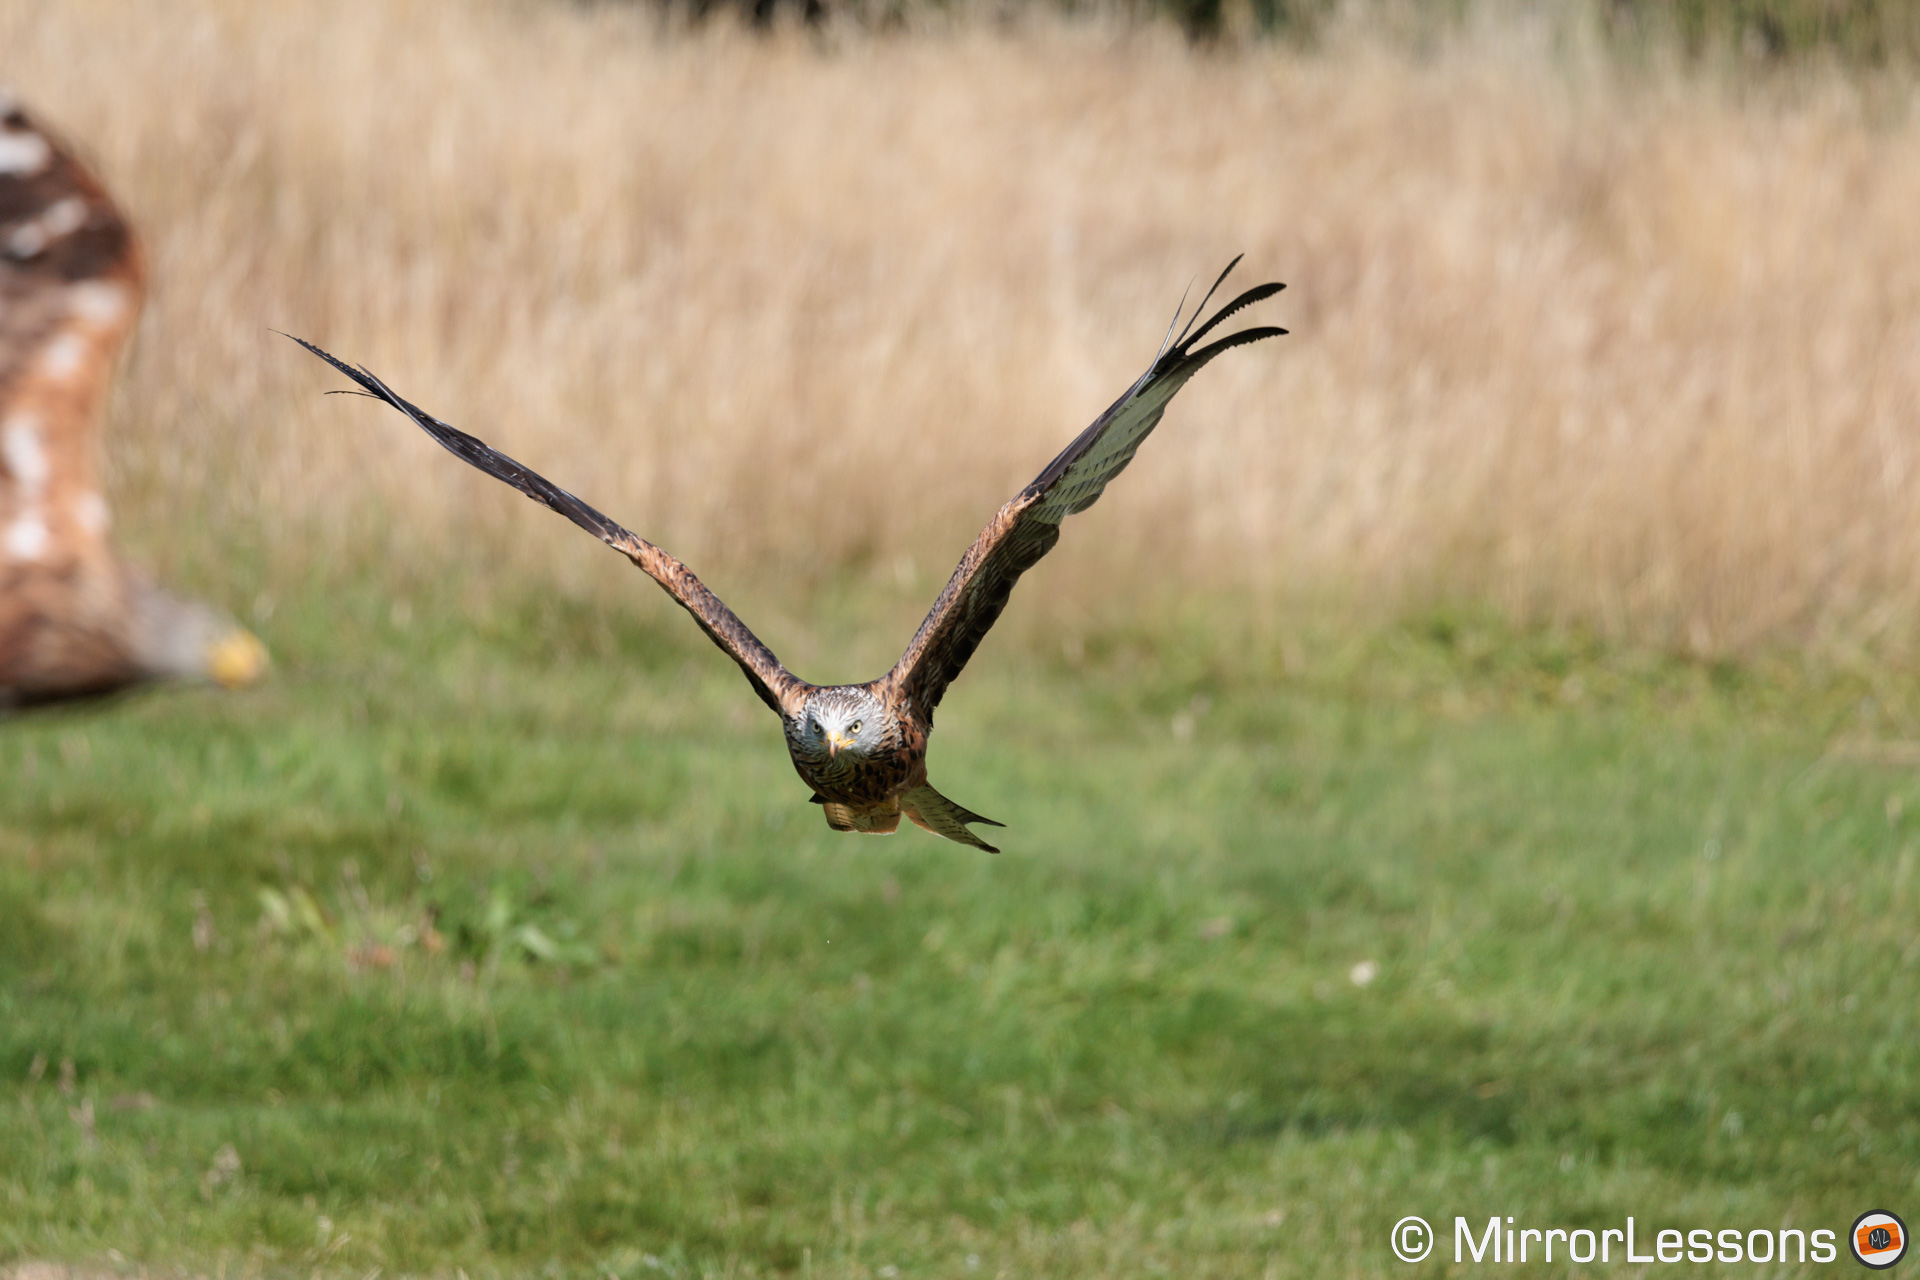 Red kite flying with green grass in the background